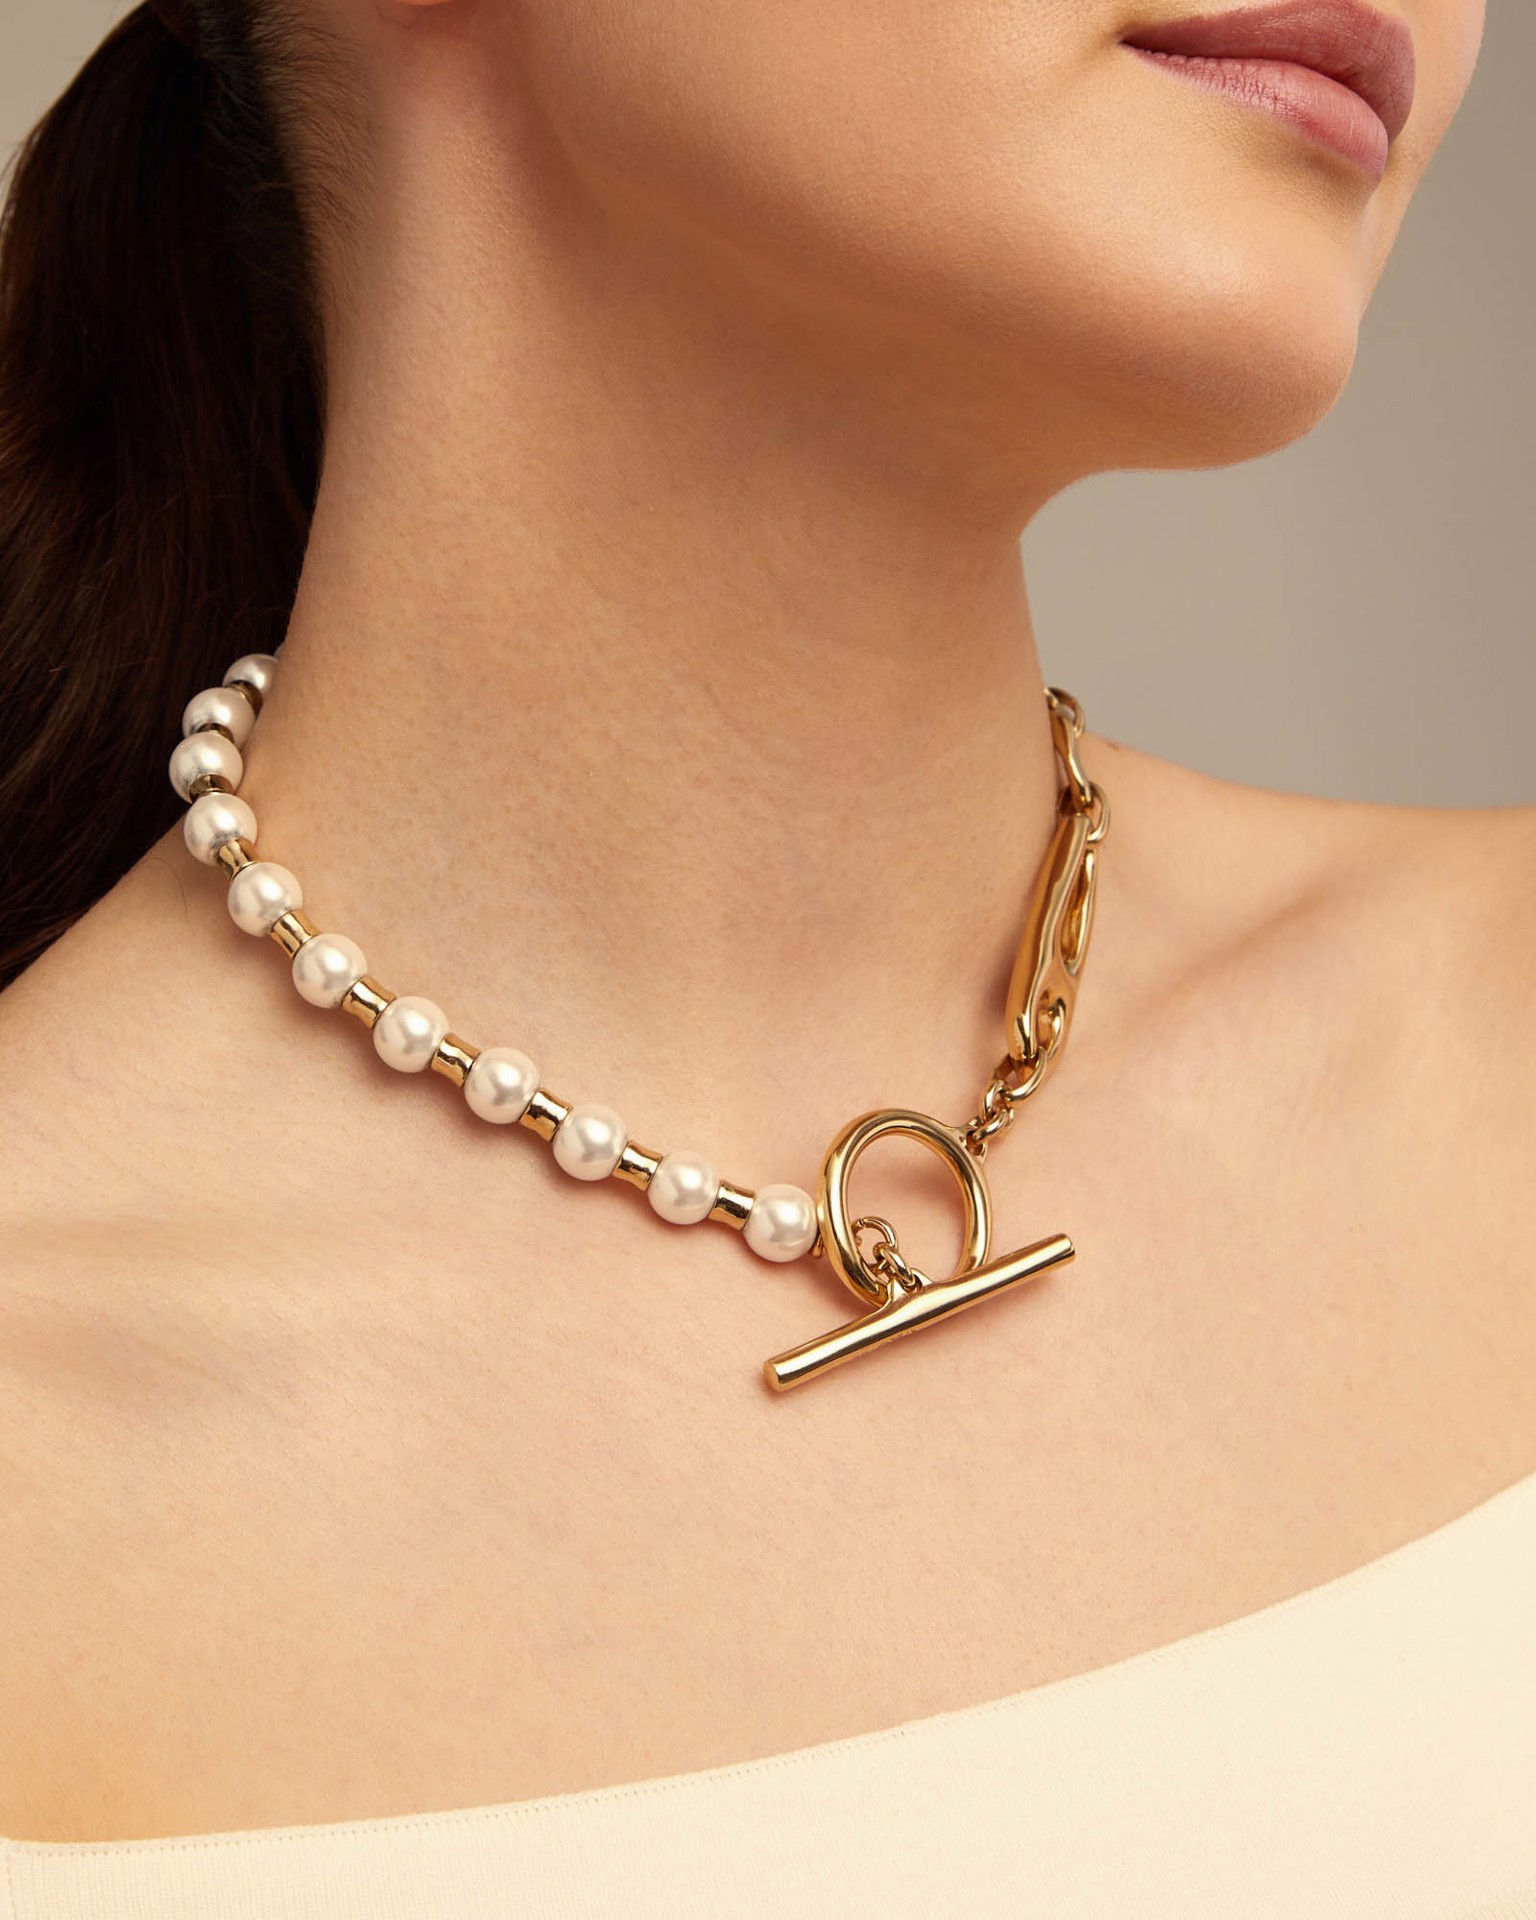 Pearl and Match Necklace by UNO DE 50 | ArtCloud